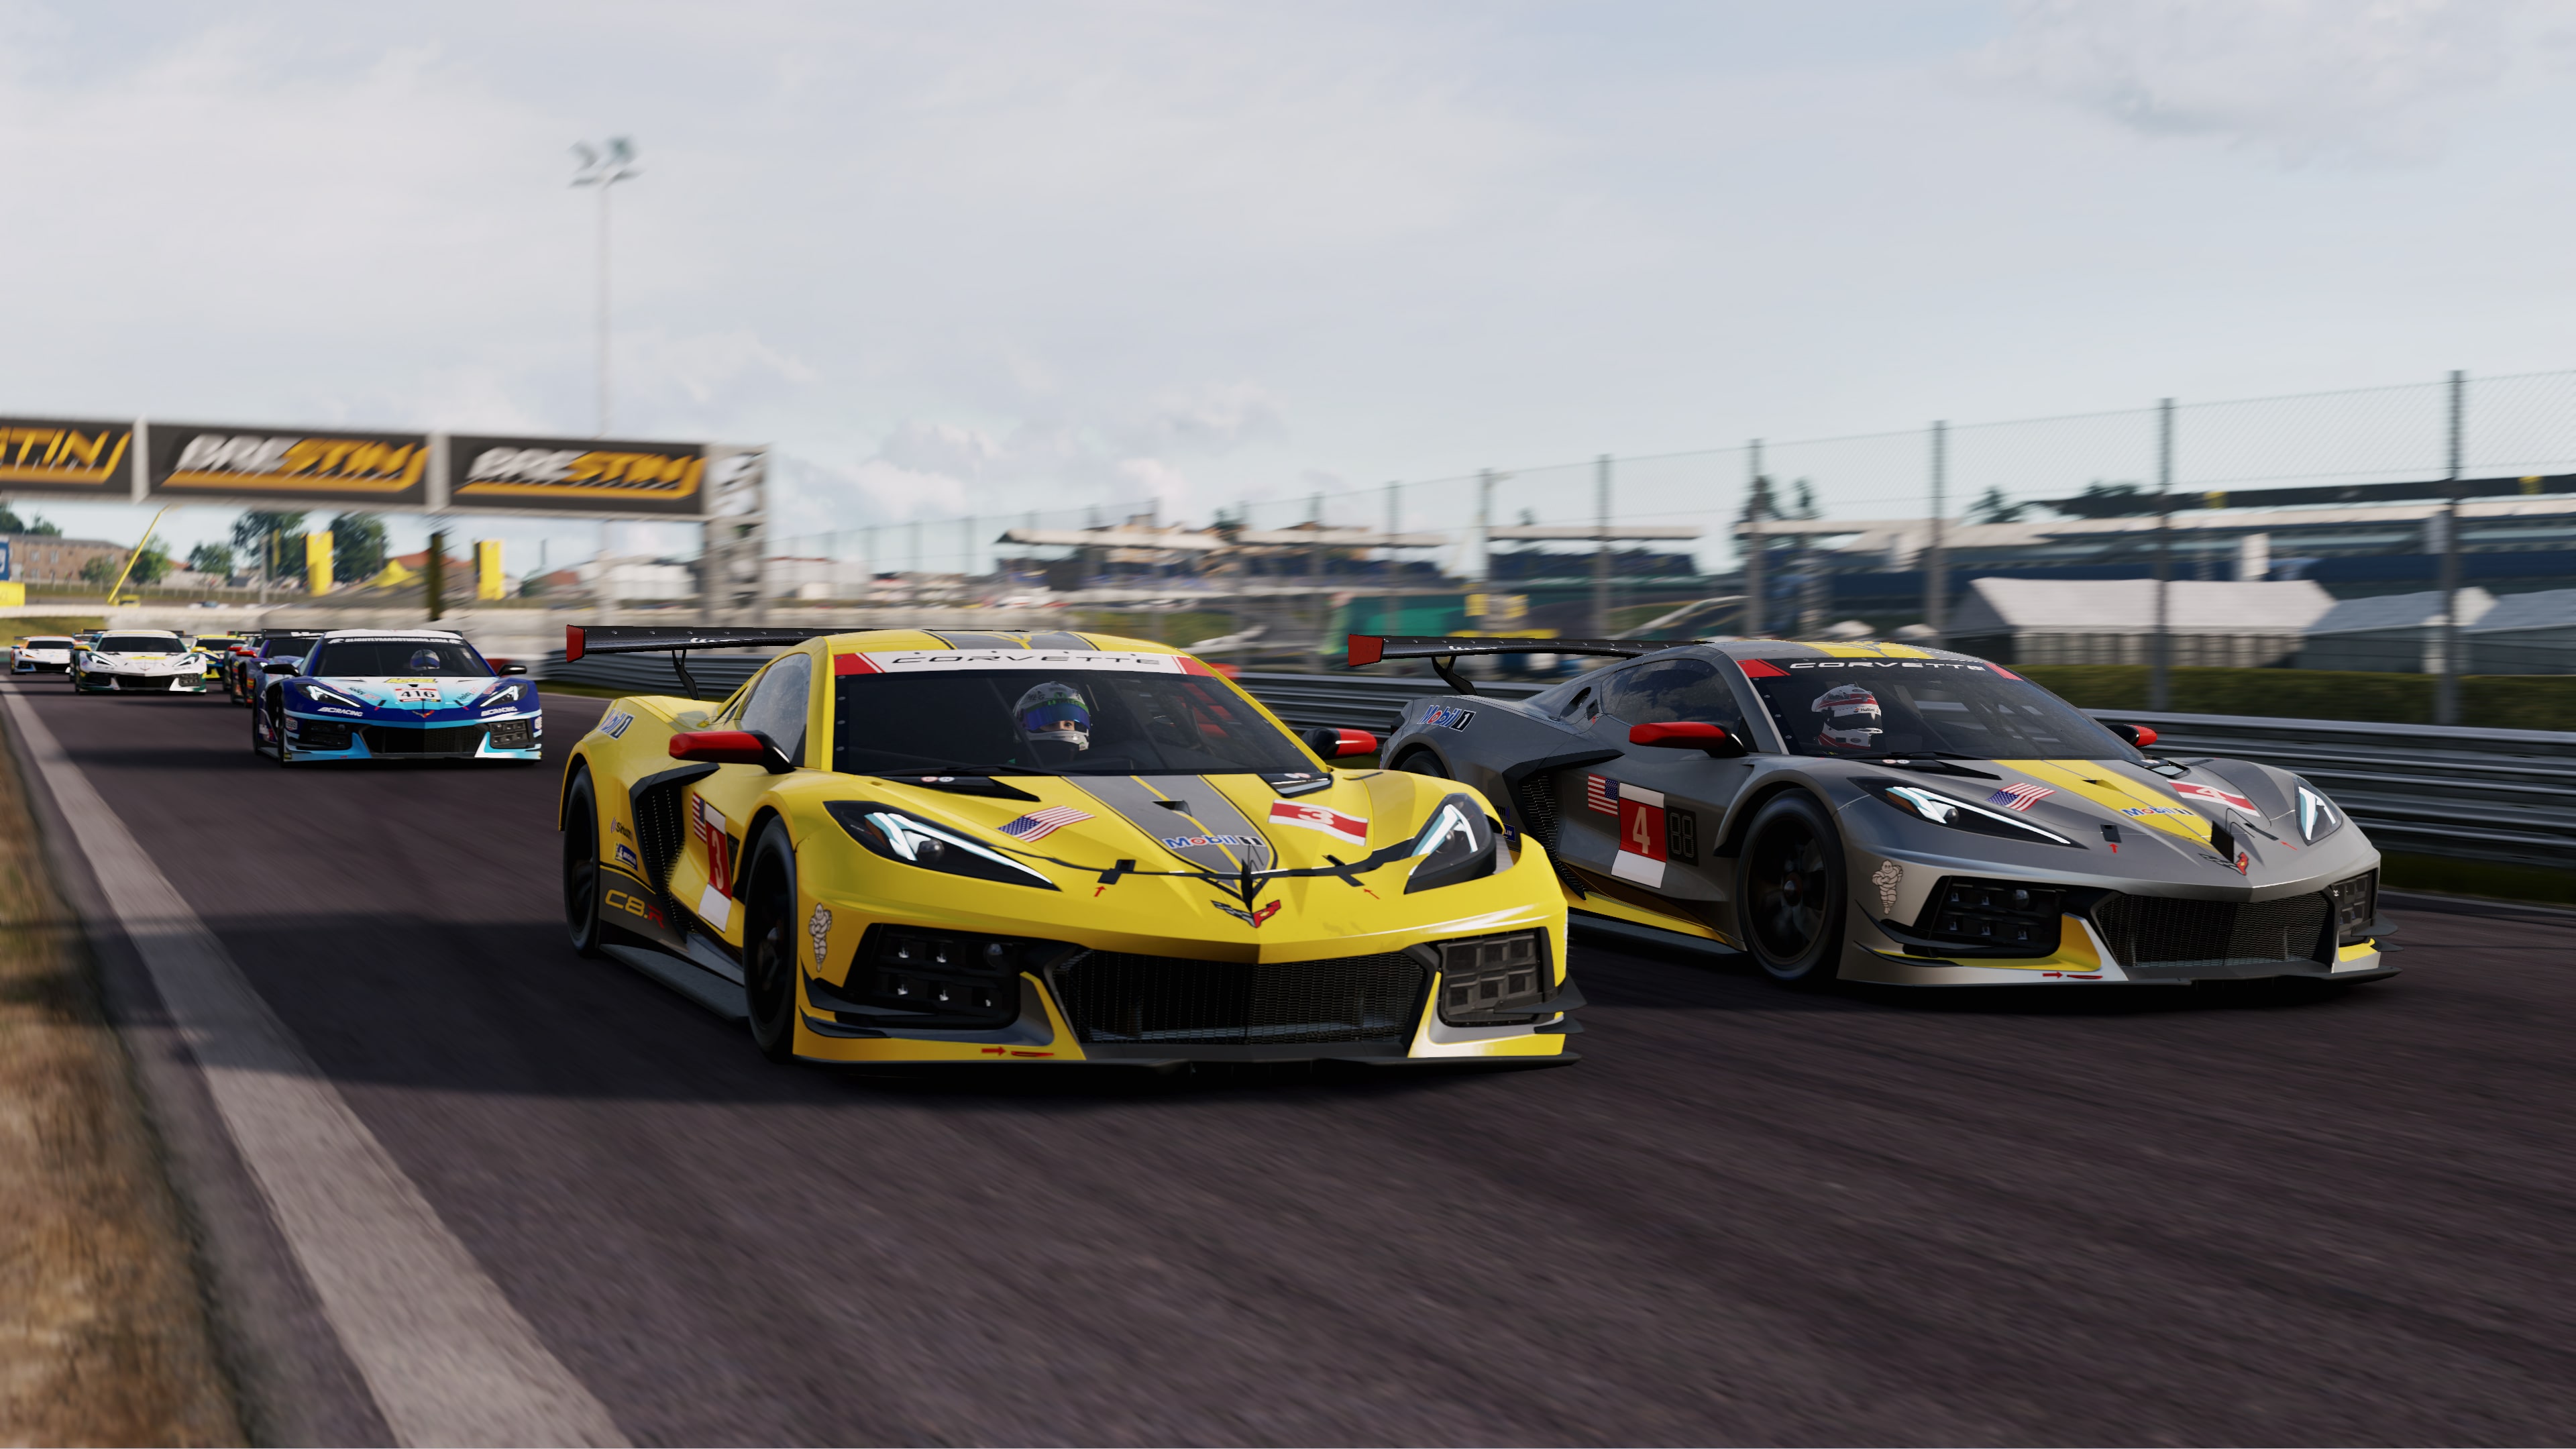 Project CARS 3 - PS4 - Console Game